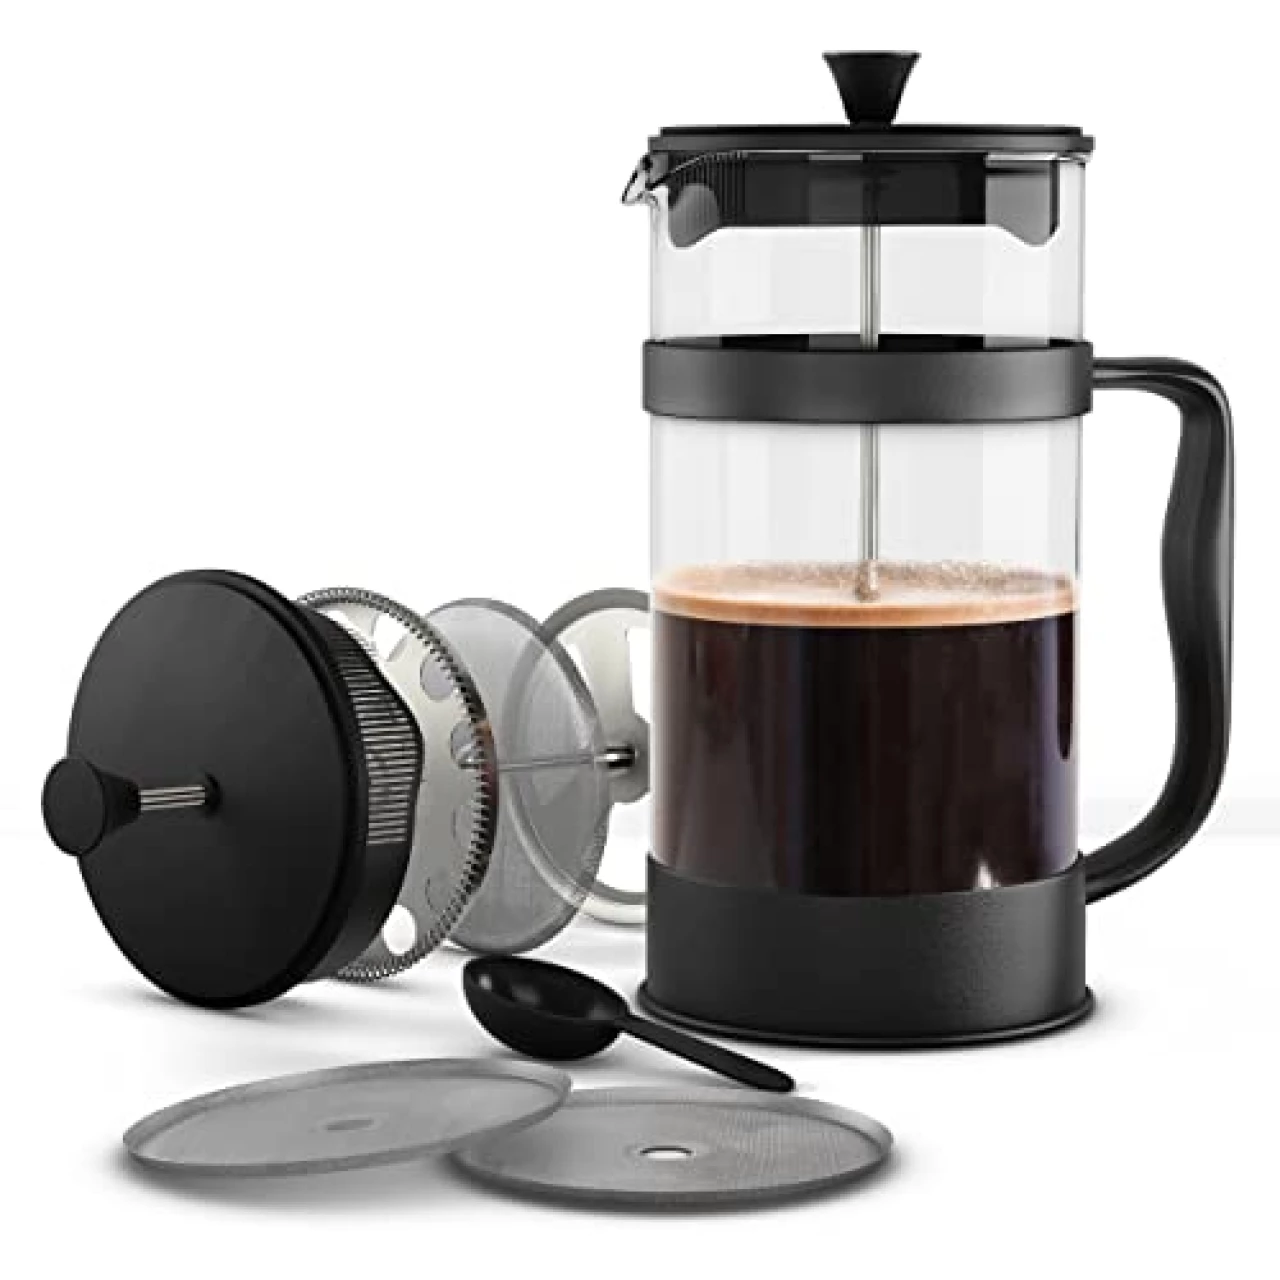 Utopia Kitchen - French Press Coffee Maker, Espresso Tea and Coffee Maker with Triple Filters 34 Ounce, Stainless Steel Plunger and Heat Resistant Borosilicate Glass - Black